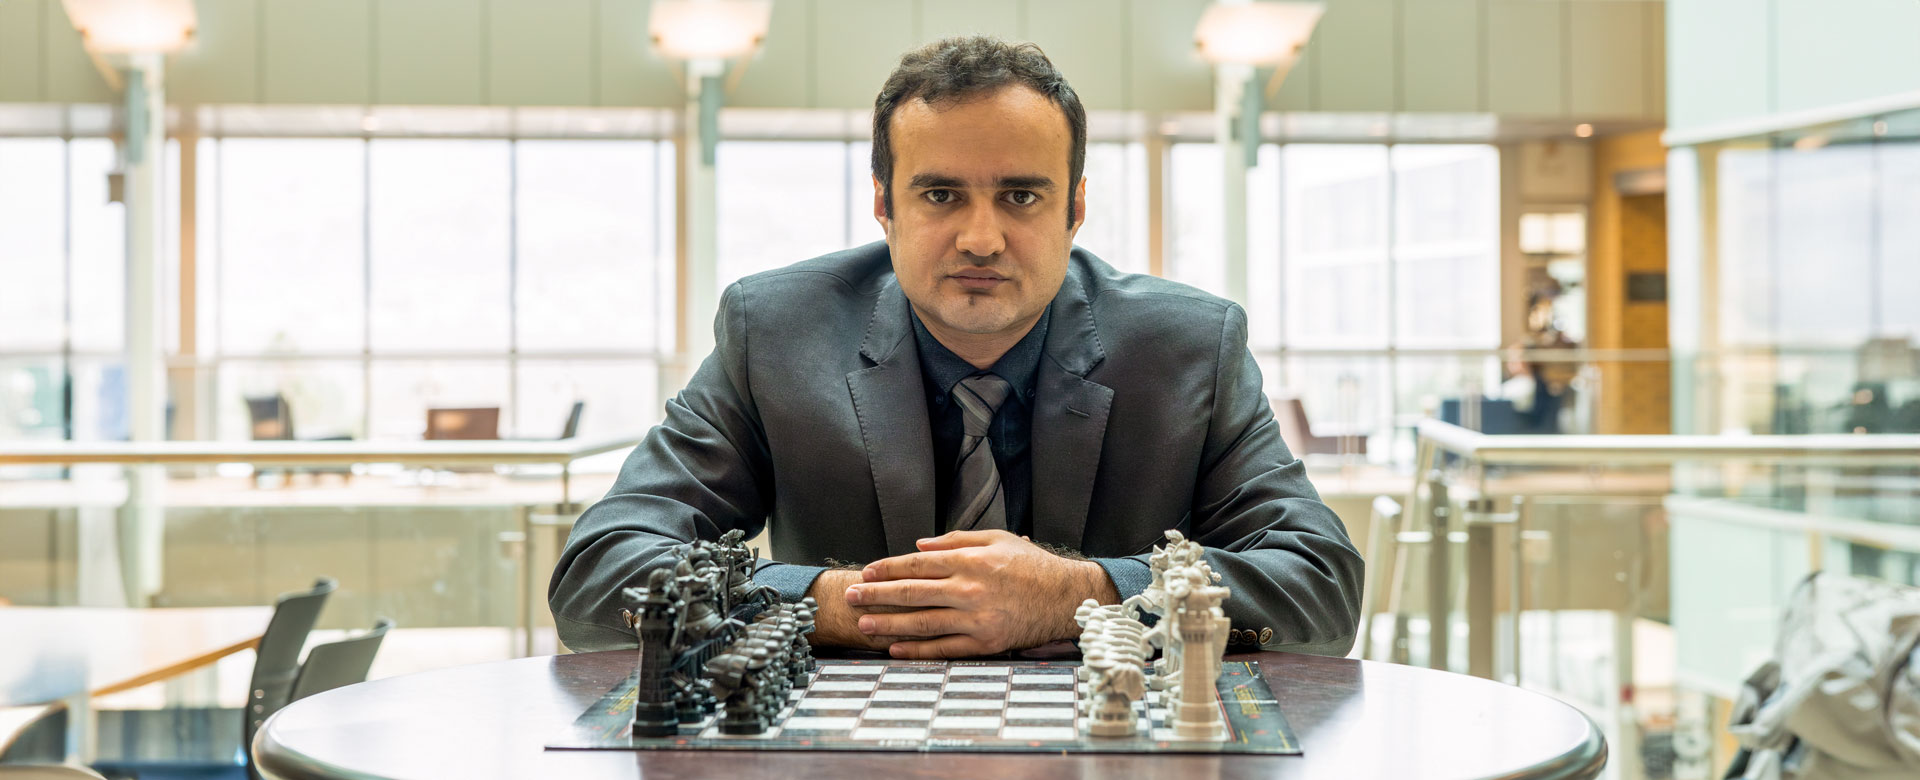 Dr. Amir Ardestani-Jaafari sits in front of a chess board with his hands clasped together, looking intently at the camera.